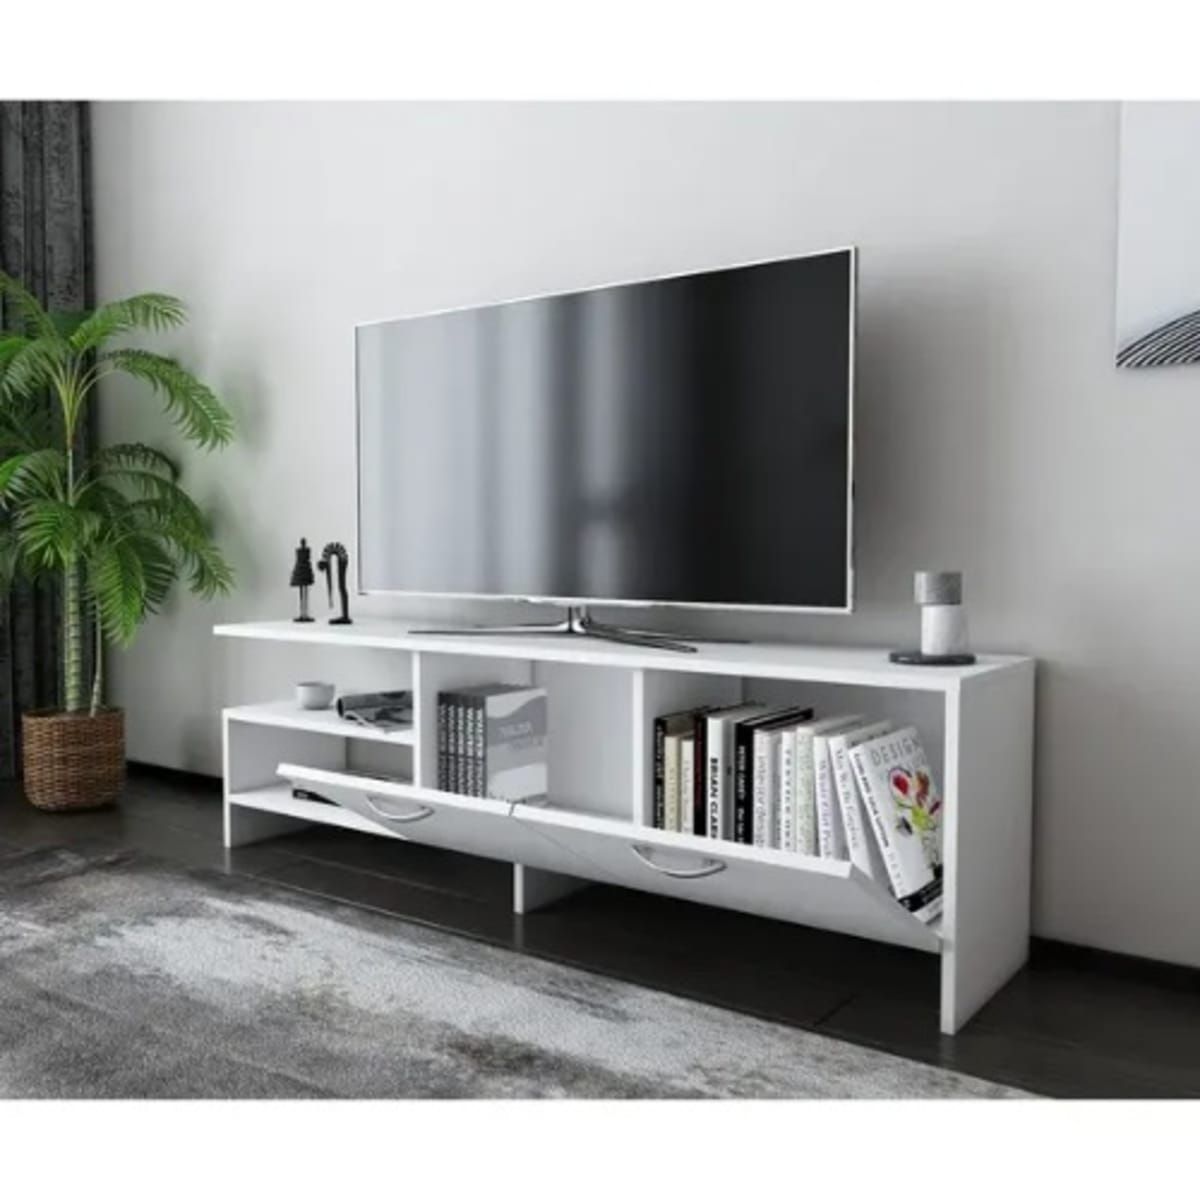 Modern Tv Stand Modern With Storage – White | Konga Online Shopping Inside Modern Stands With Shelves (View 13 of 15)